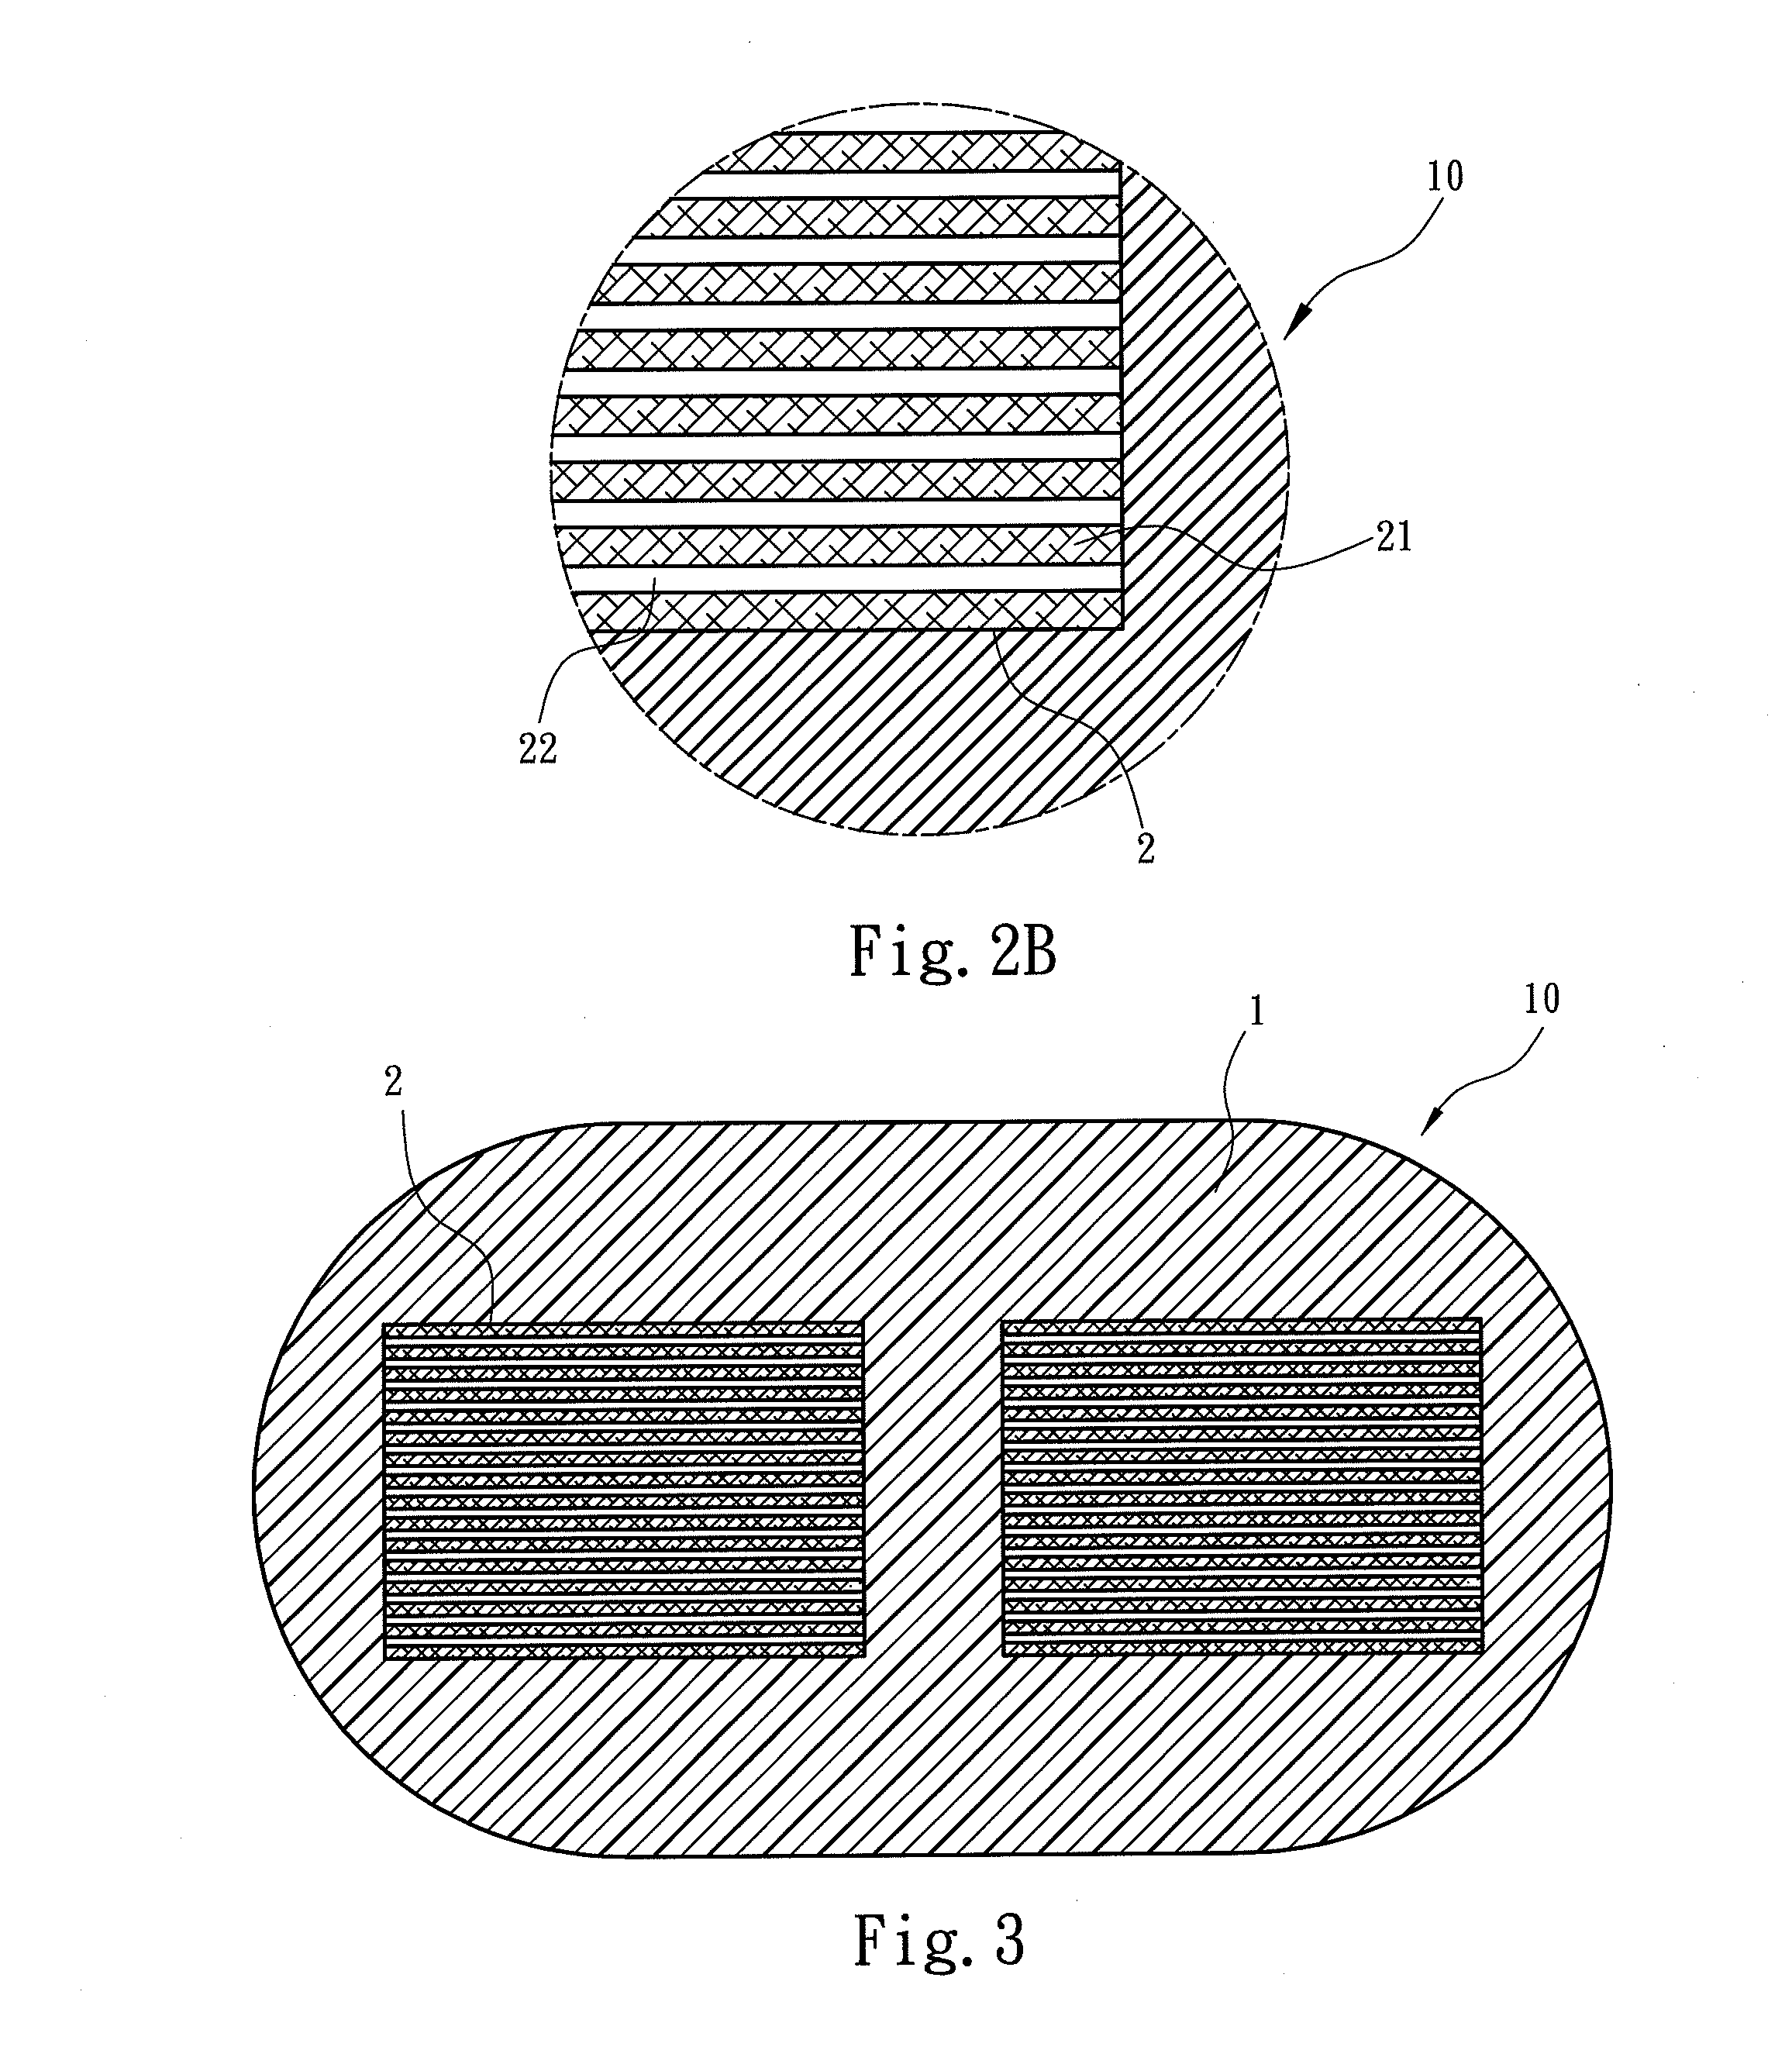 Conducting wire structure and method of manufacturing a conducting wire core